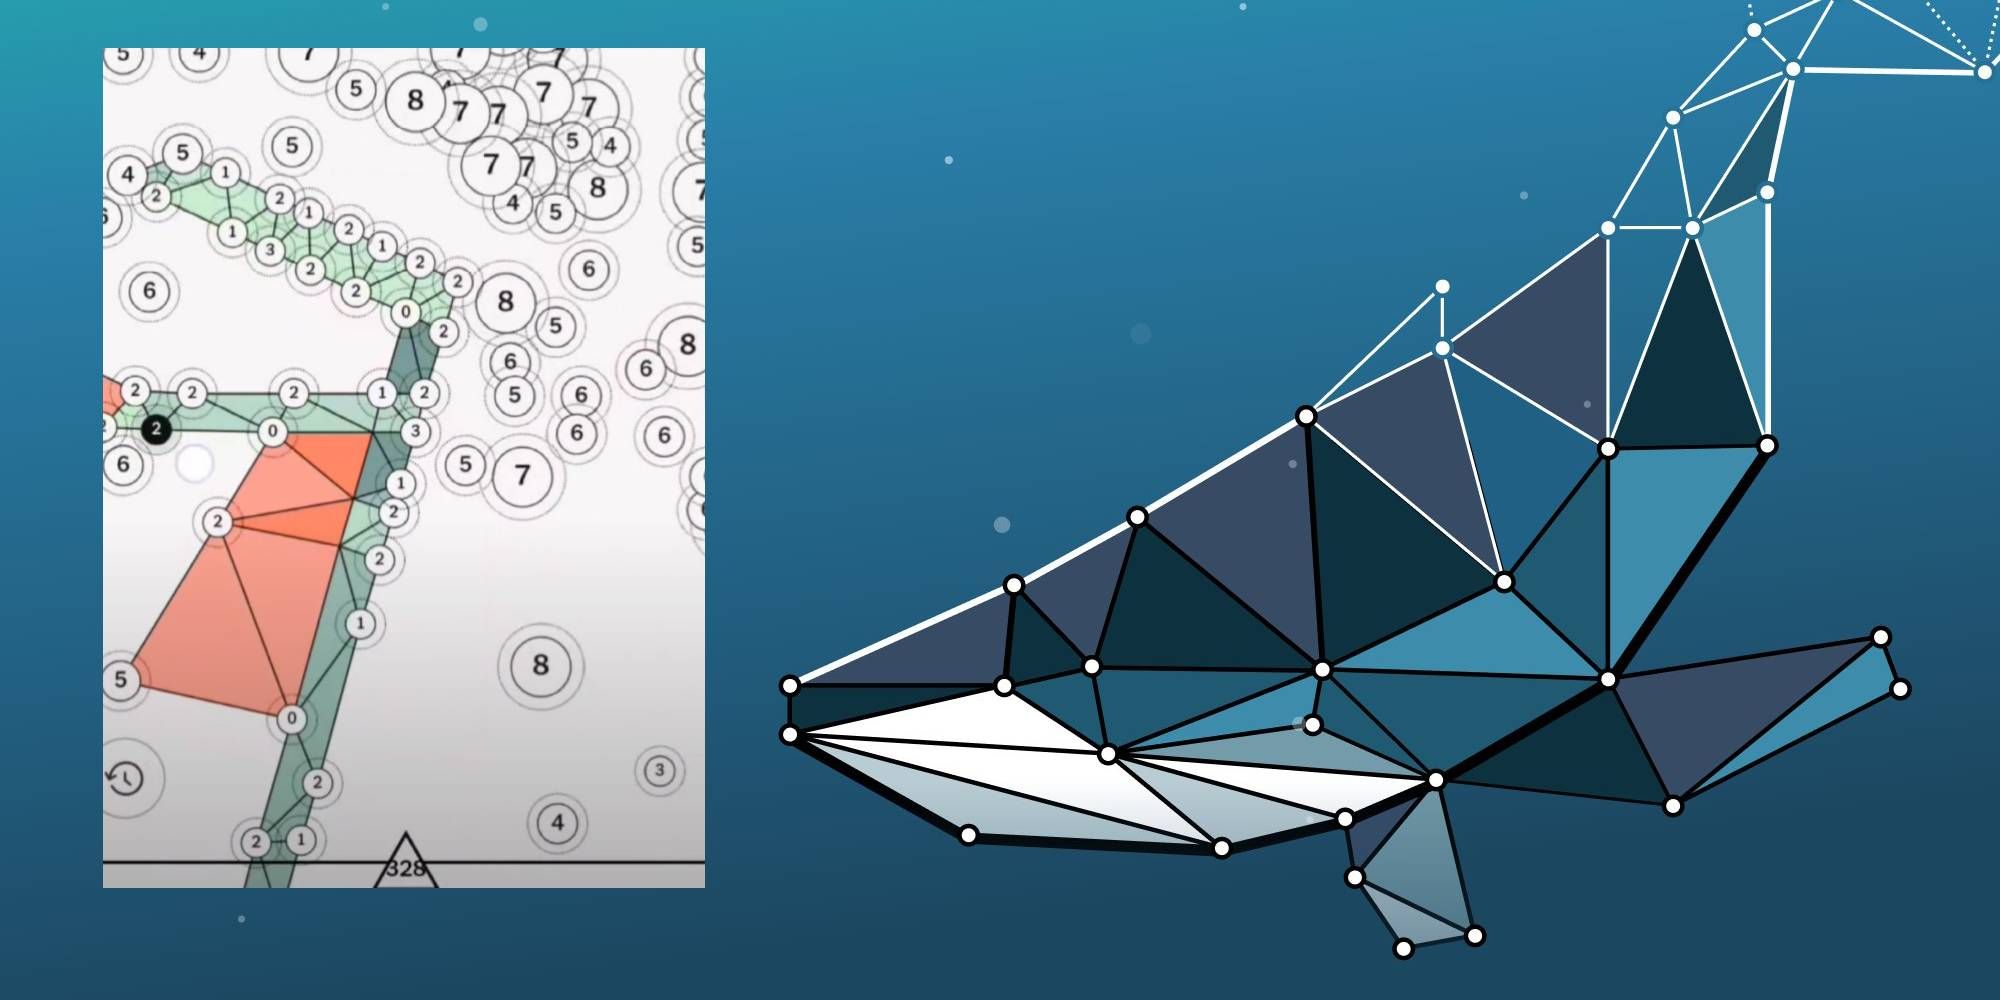 NYT Vertex game making image of whale with connected triangles and different game being played with complex grid